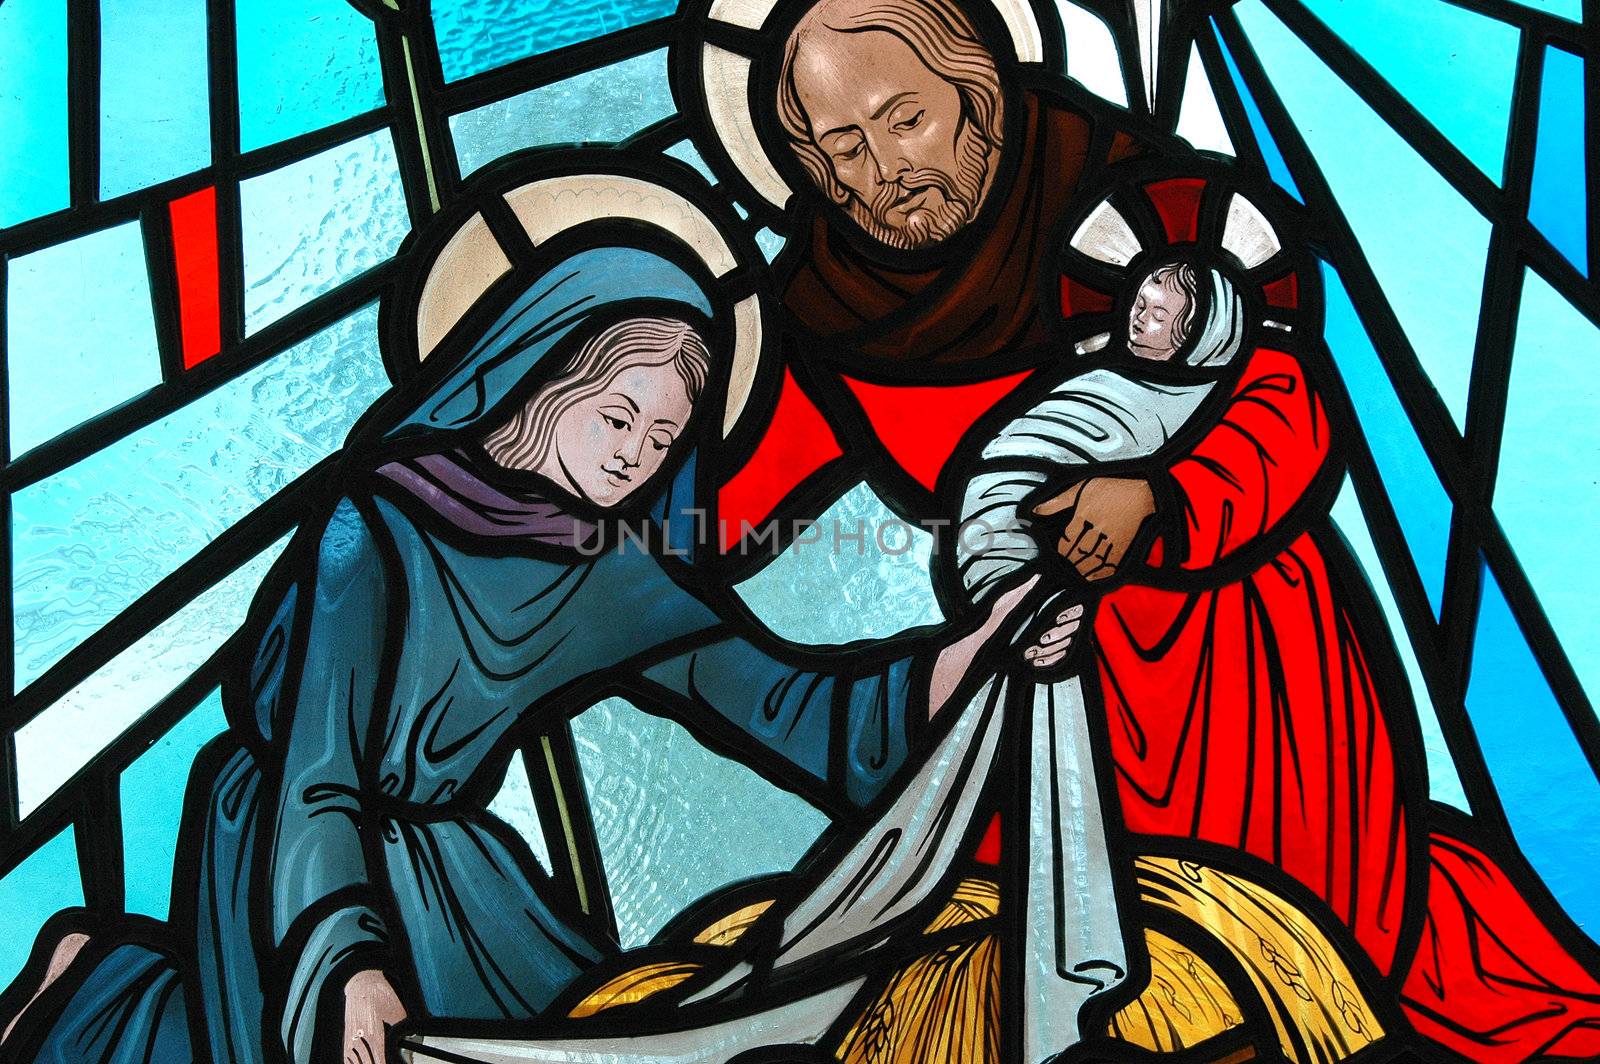 The birth of christ stained glass window.